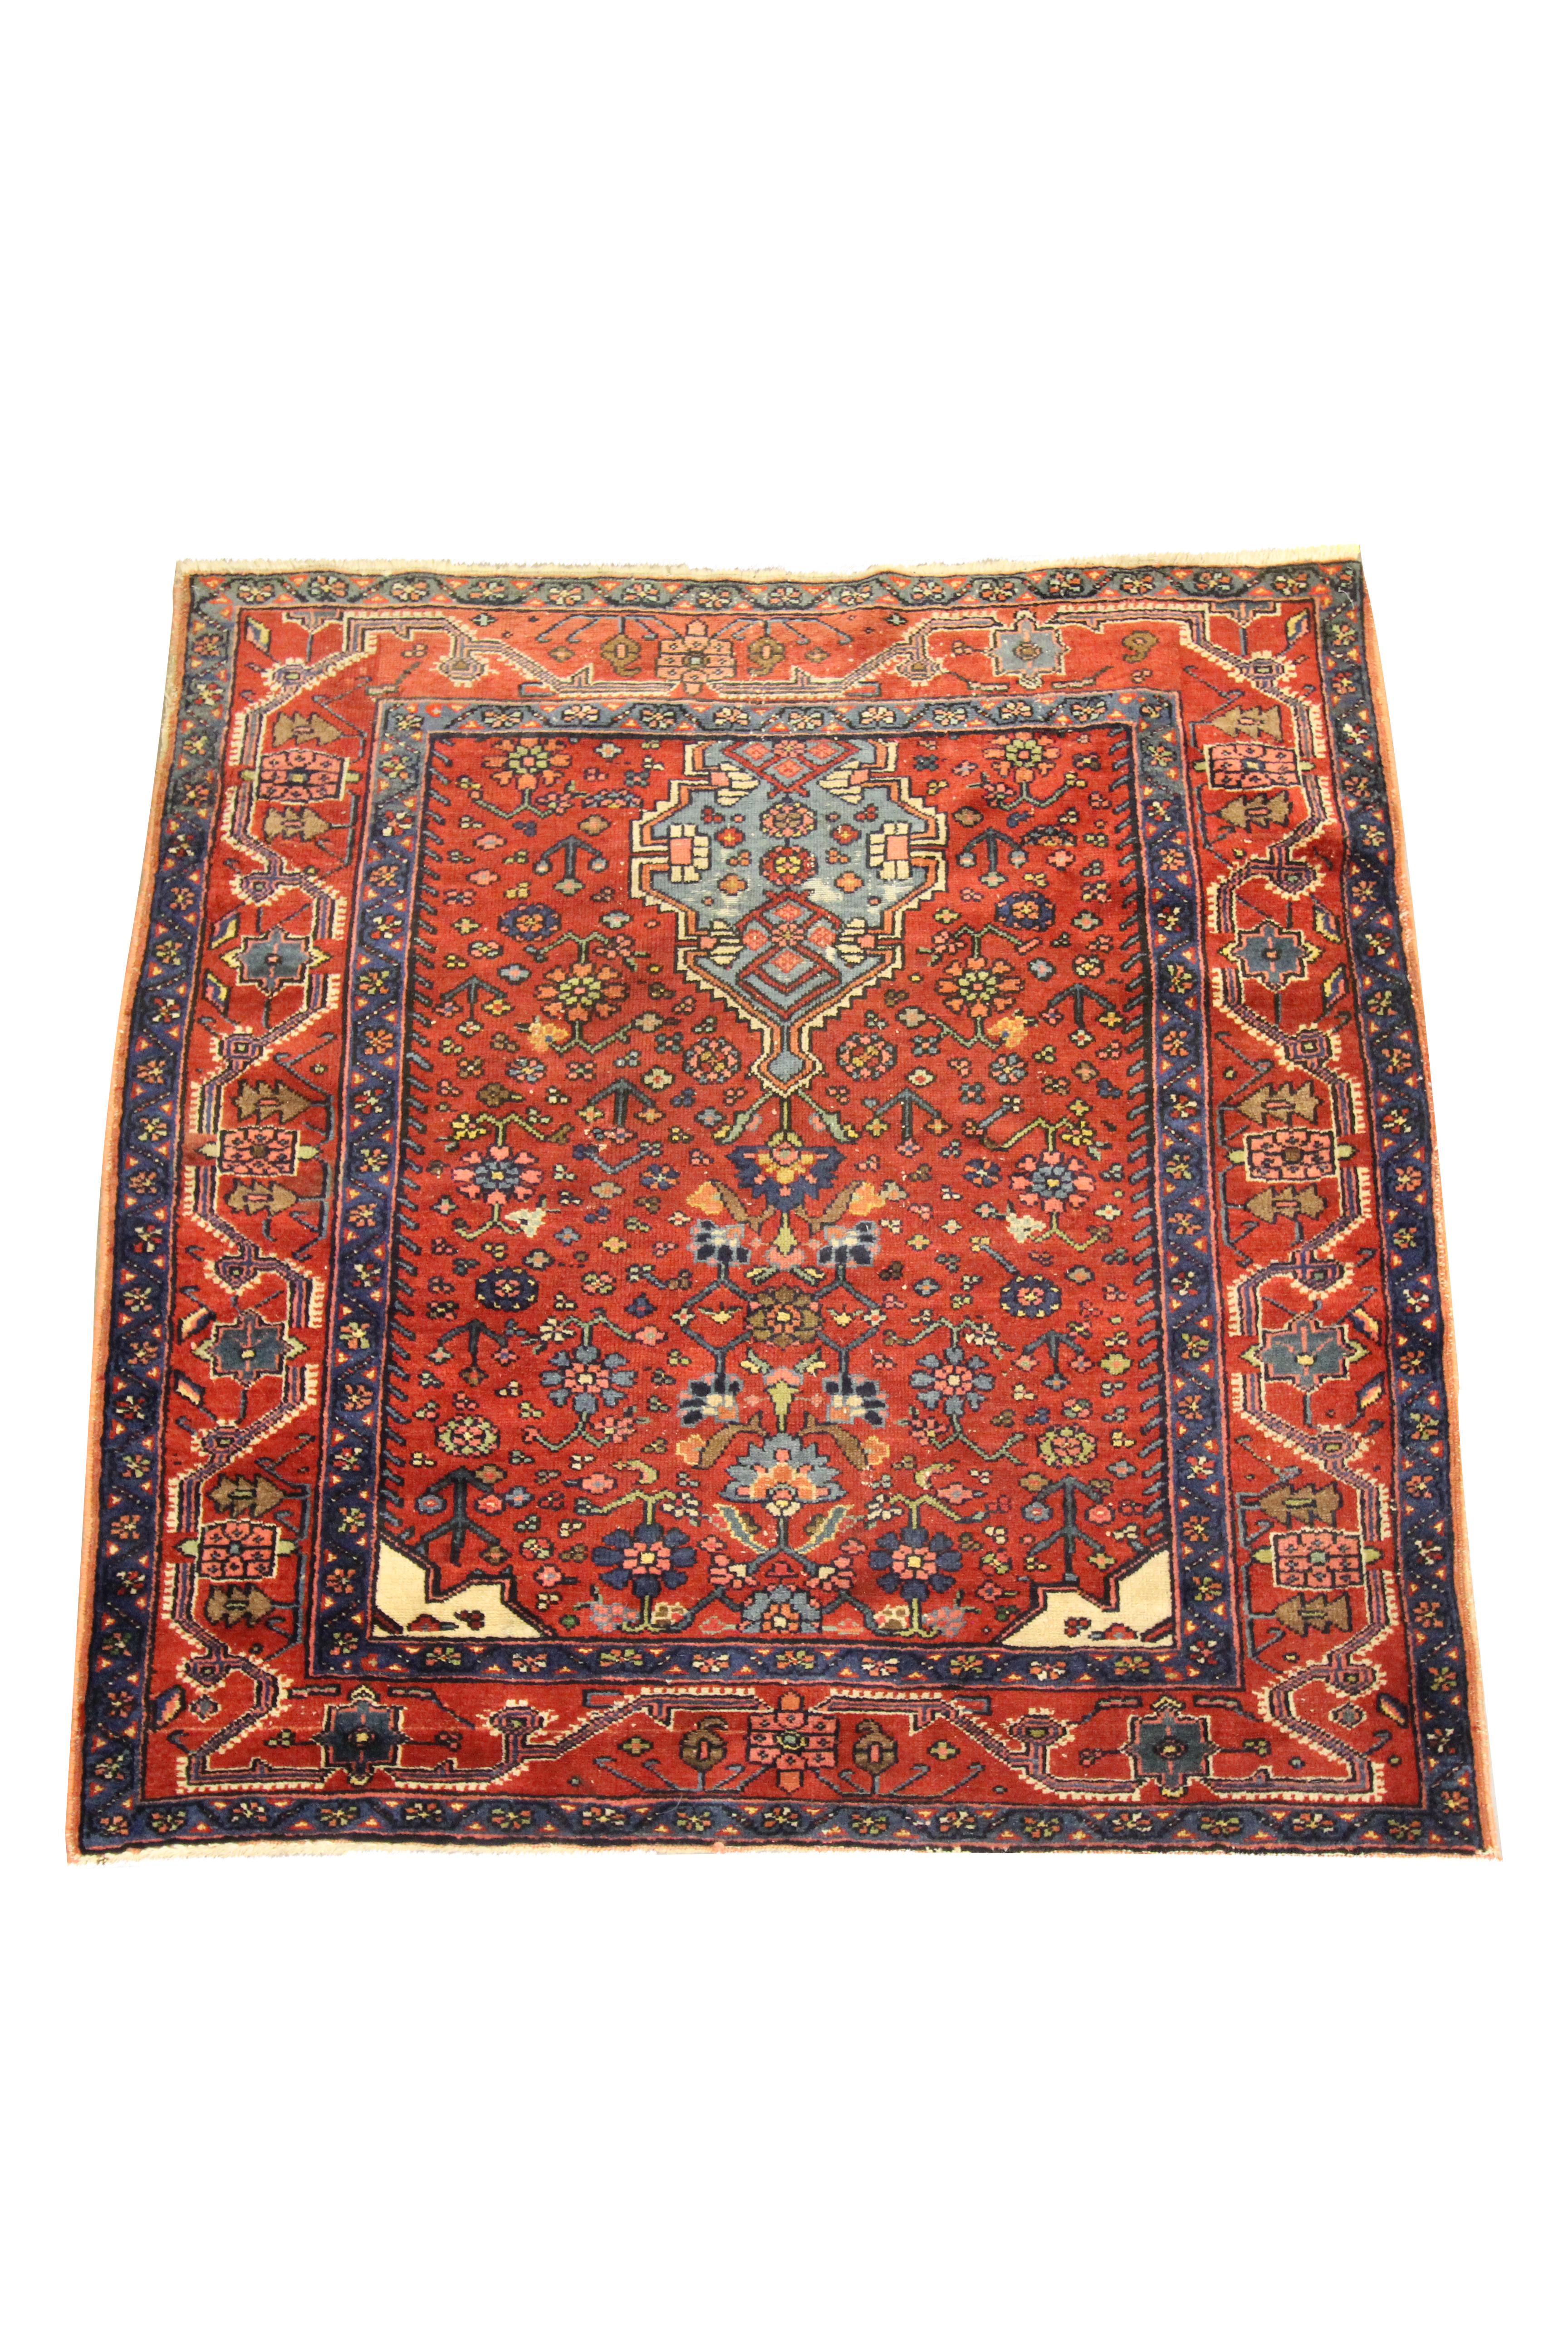 This fine wool area rug is an excellent example of carpets woven in the late 19th century, circa 1880. The design features a traditional tribal pattern with native motifs woven throughout on a rust-red background in accents of blue, green, orange